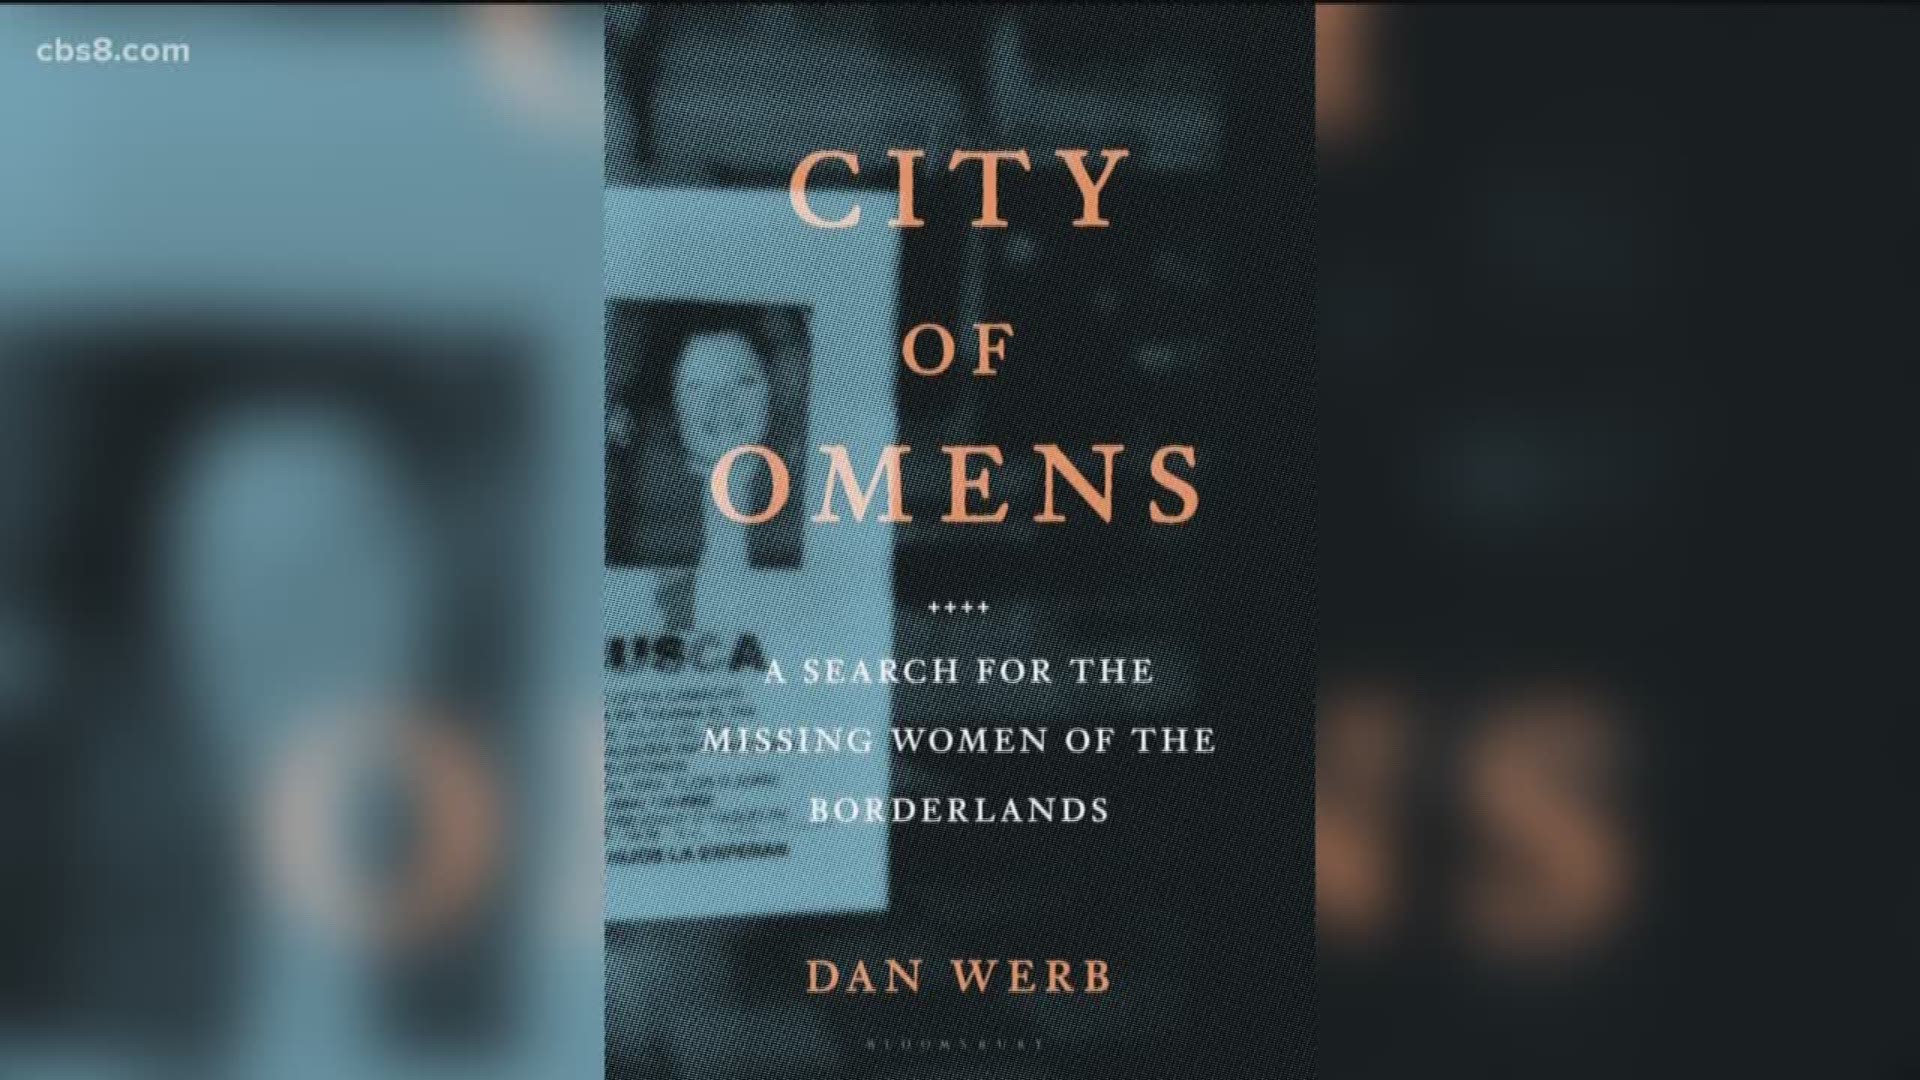 Epidemiologist and author Dan Werb joined Morning Extra to talk about his research in Tijuana and how a lot of the crime disproportionately harms women.